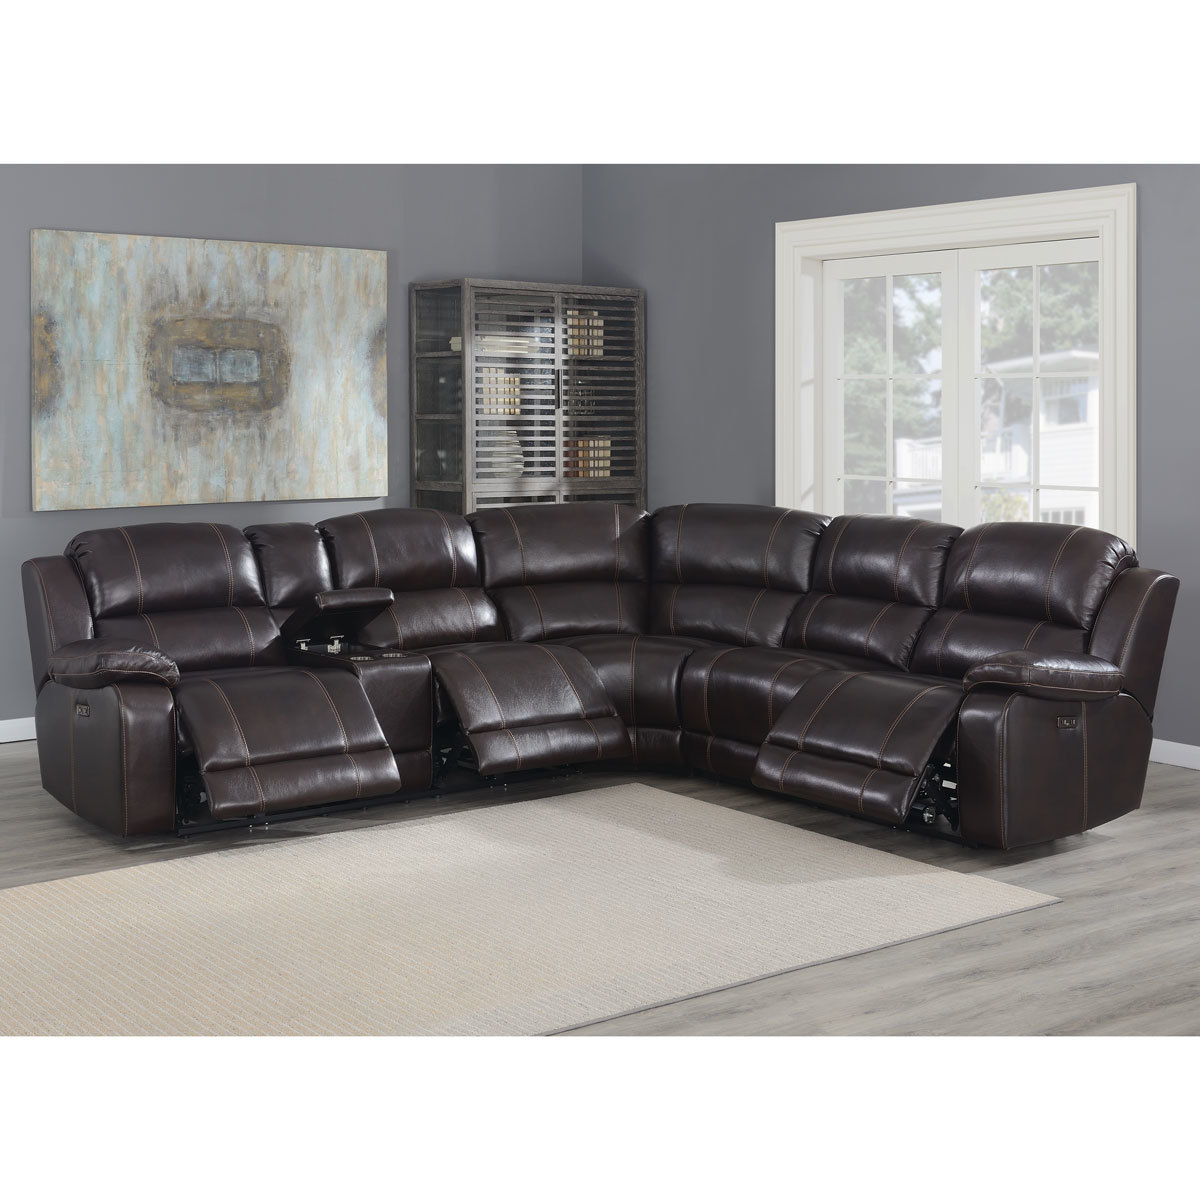 Pulaski Dunhill Brown Leather Power, Costco Leather Couches Electric Recliner